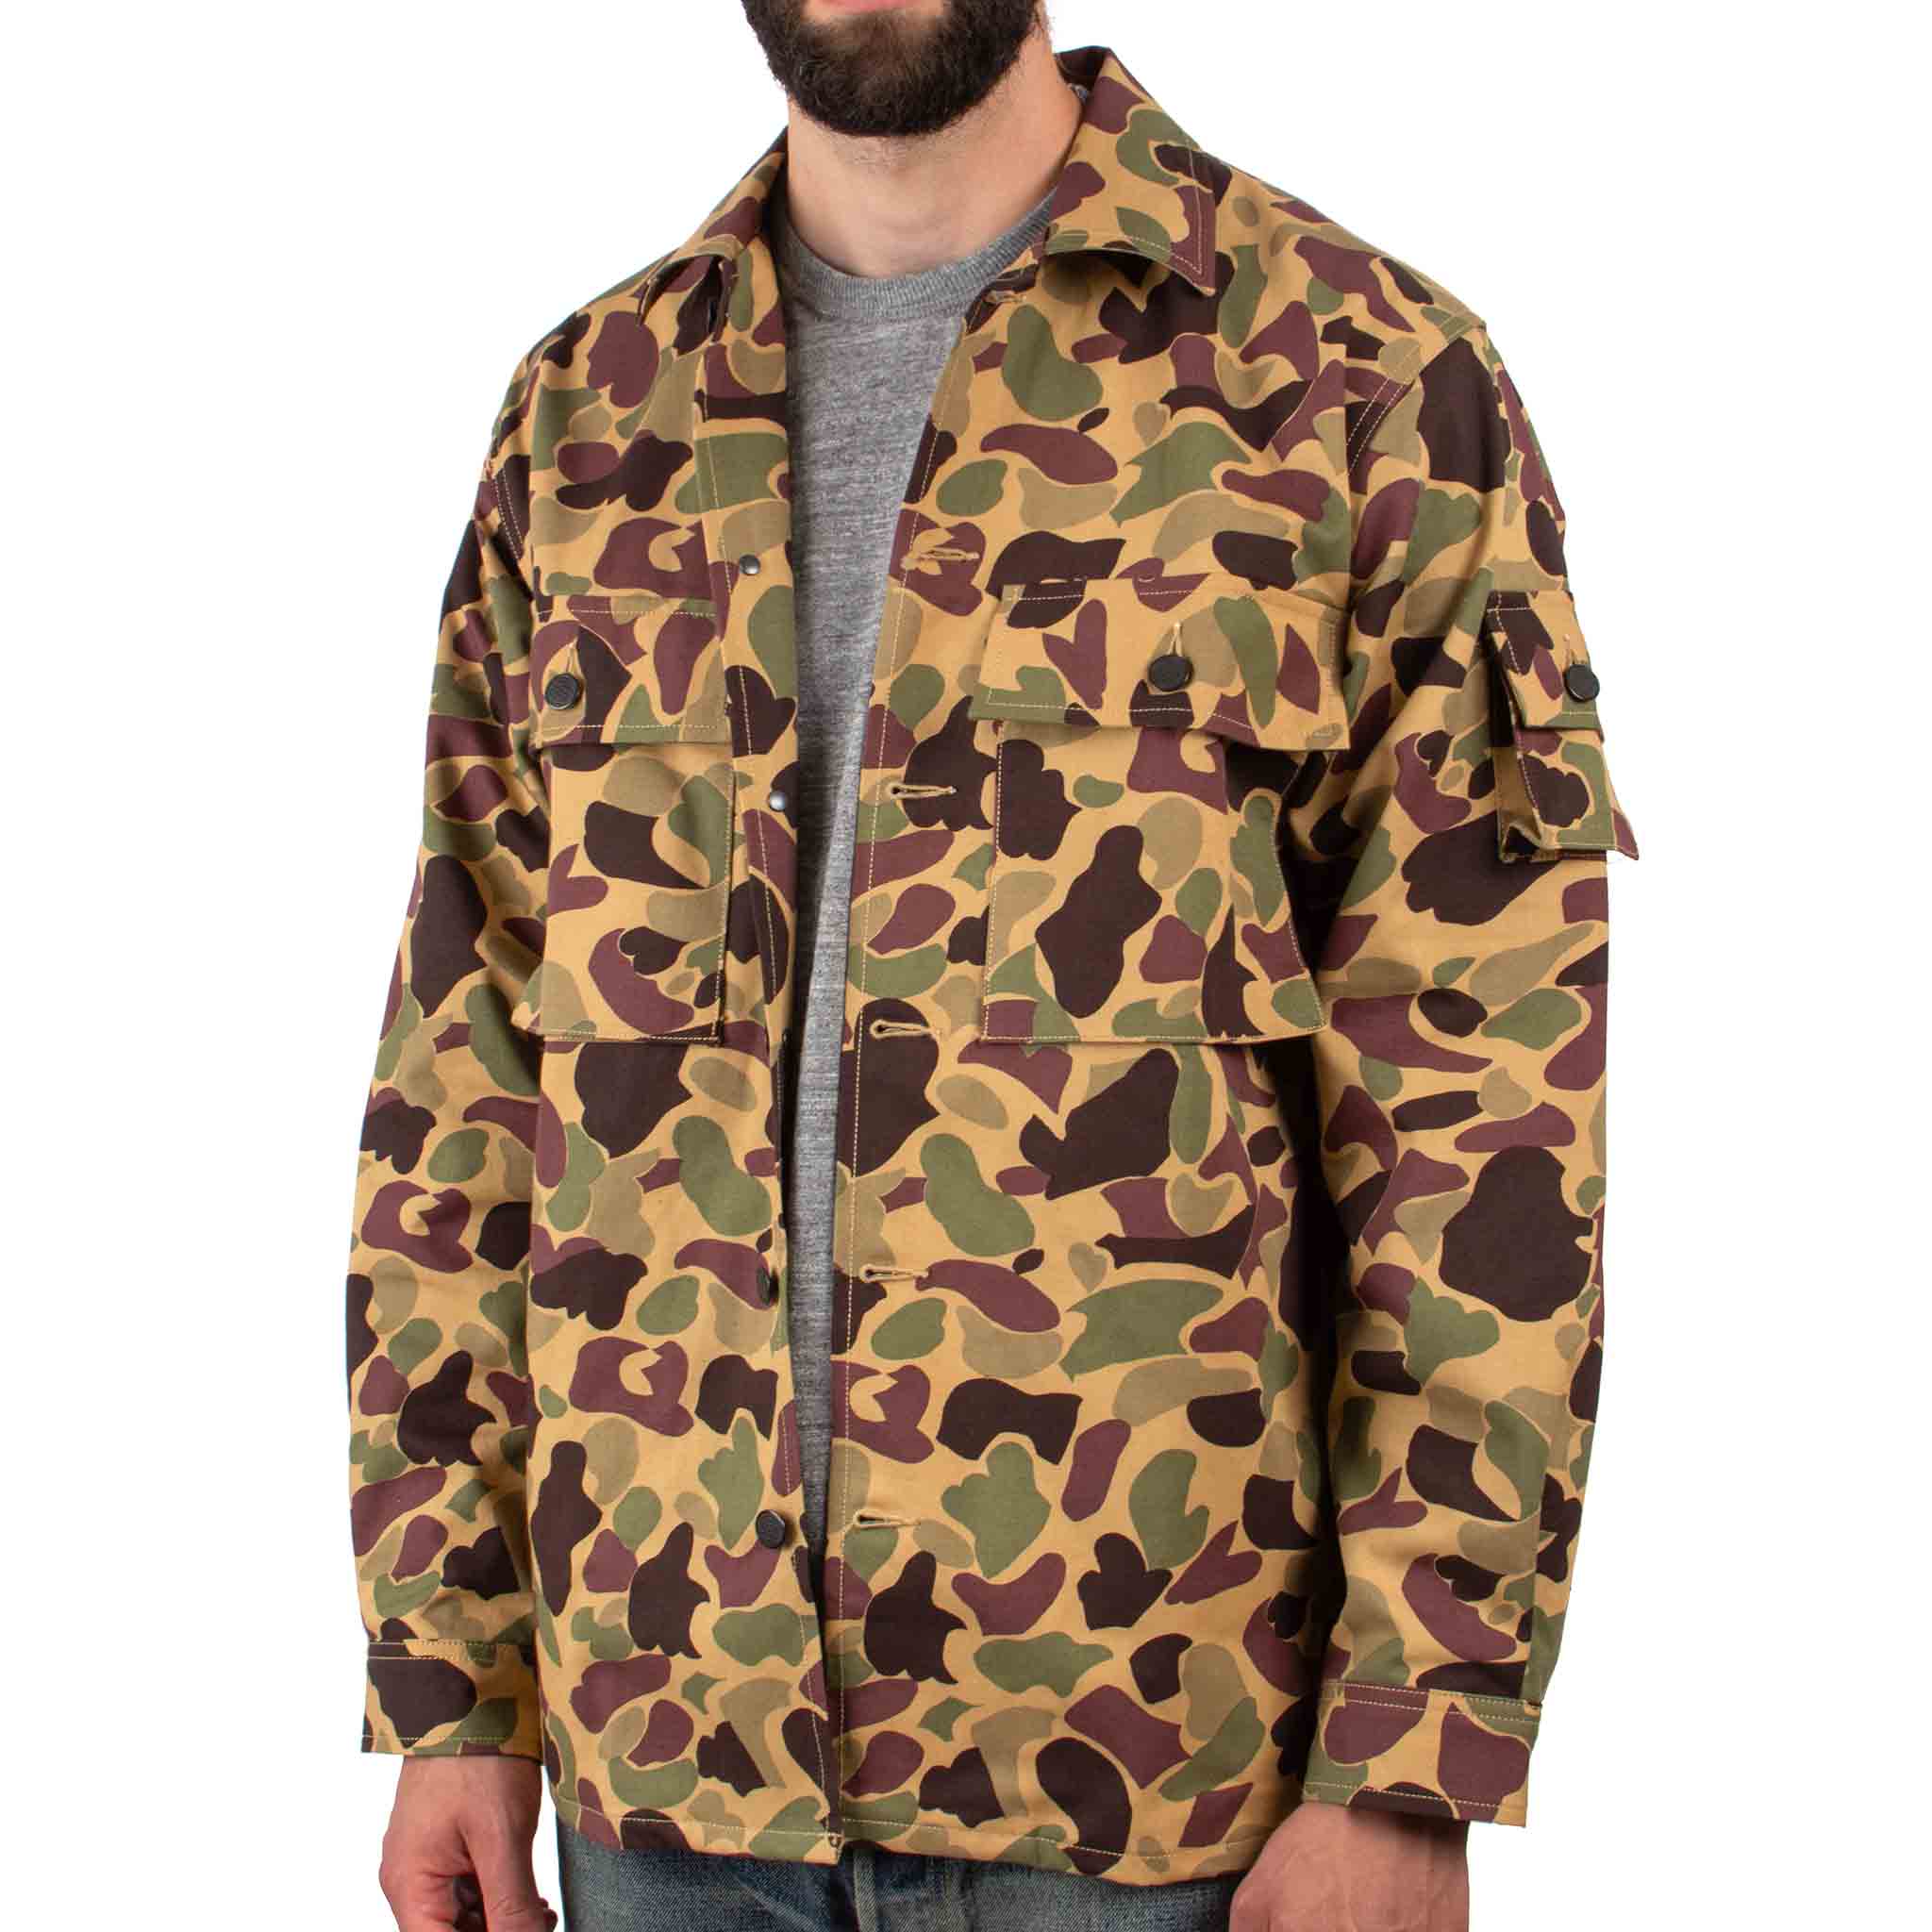 The Real McCoy's MJ21013 Beo Gam Camouflage Shirt Beige Close